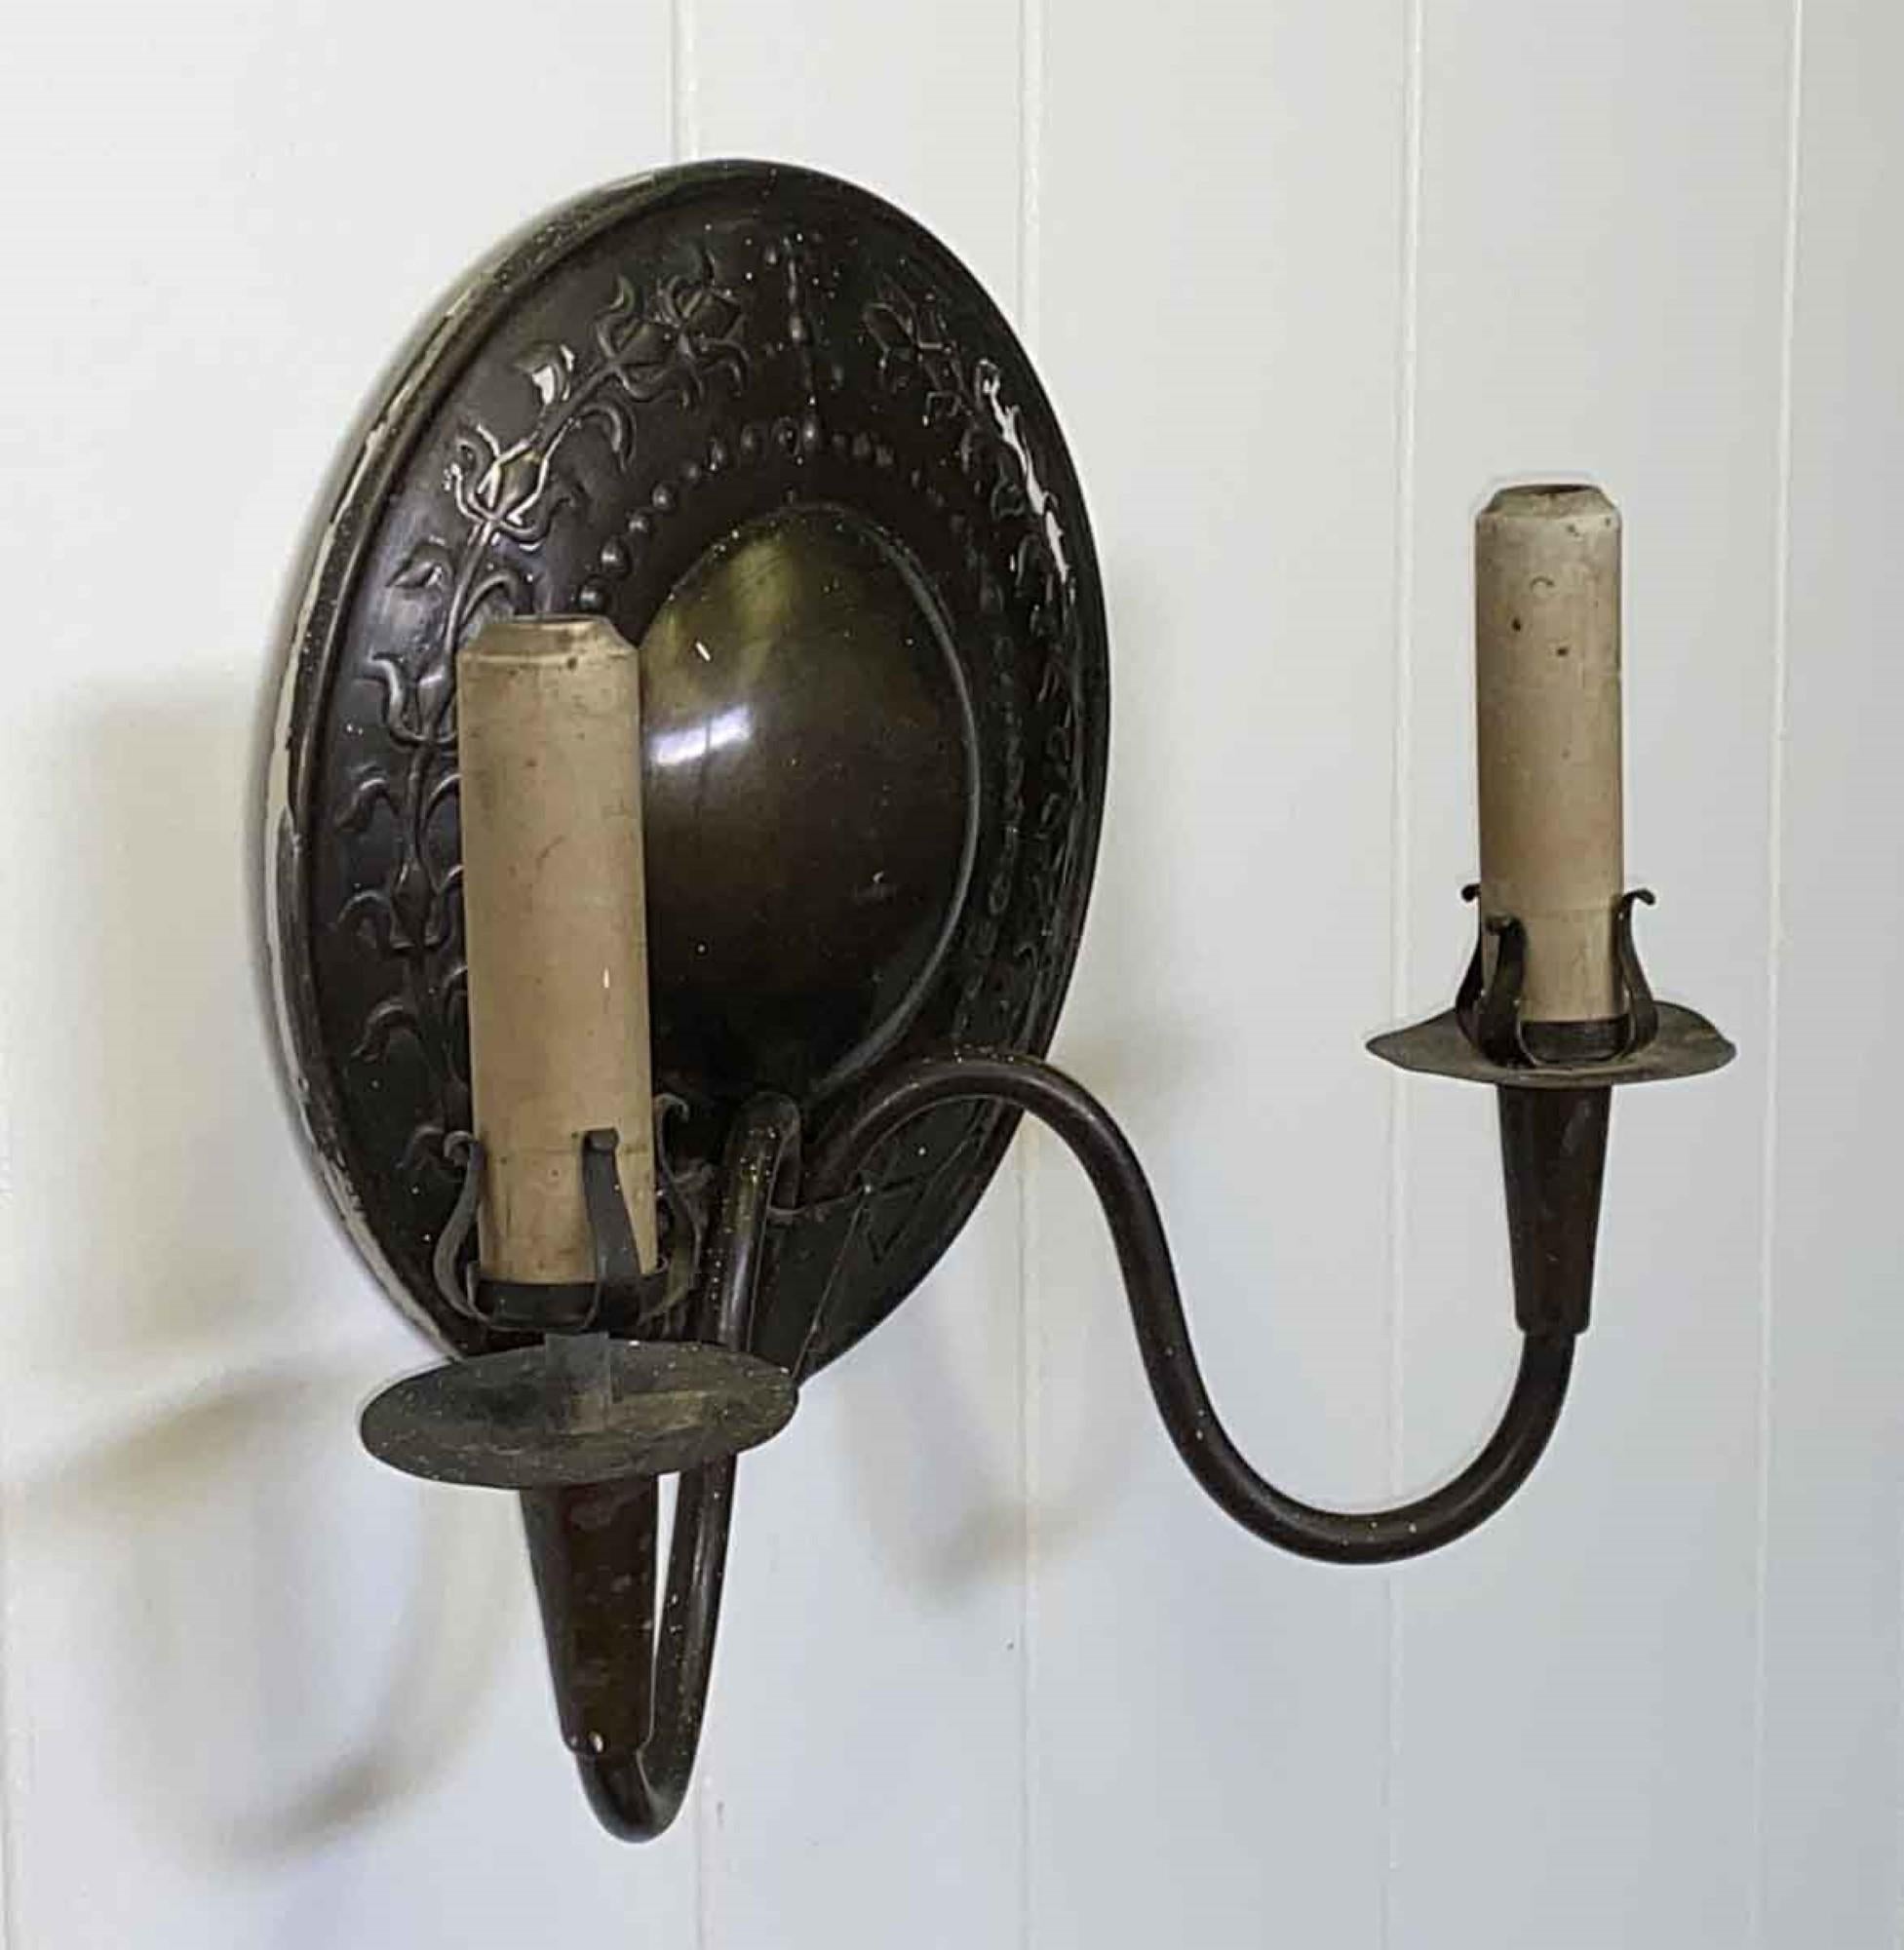 1920s Arts & Crafts hand-hammered brass wall sconce with dark finish. EF Caldwell signed with the original porcelain candle sticks. One available. This can be seen at our 400 Gilligan St location in Scranton, PA. 